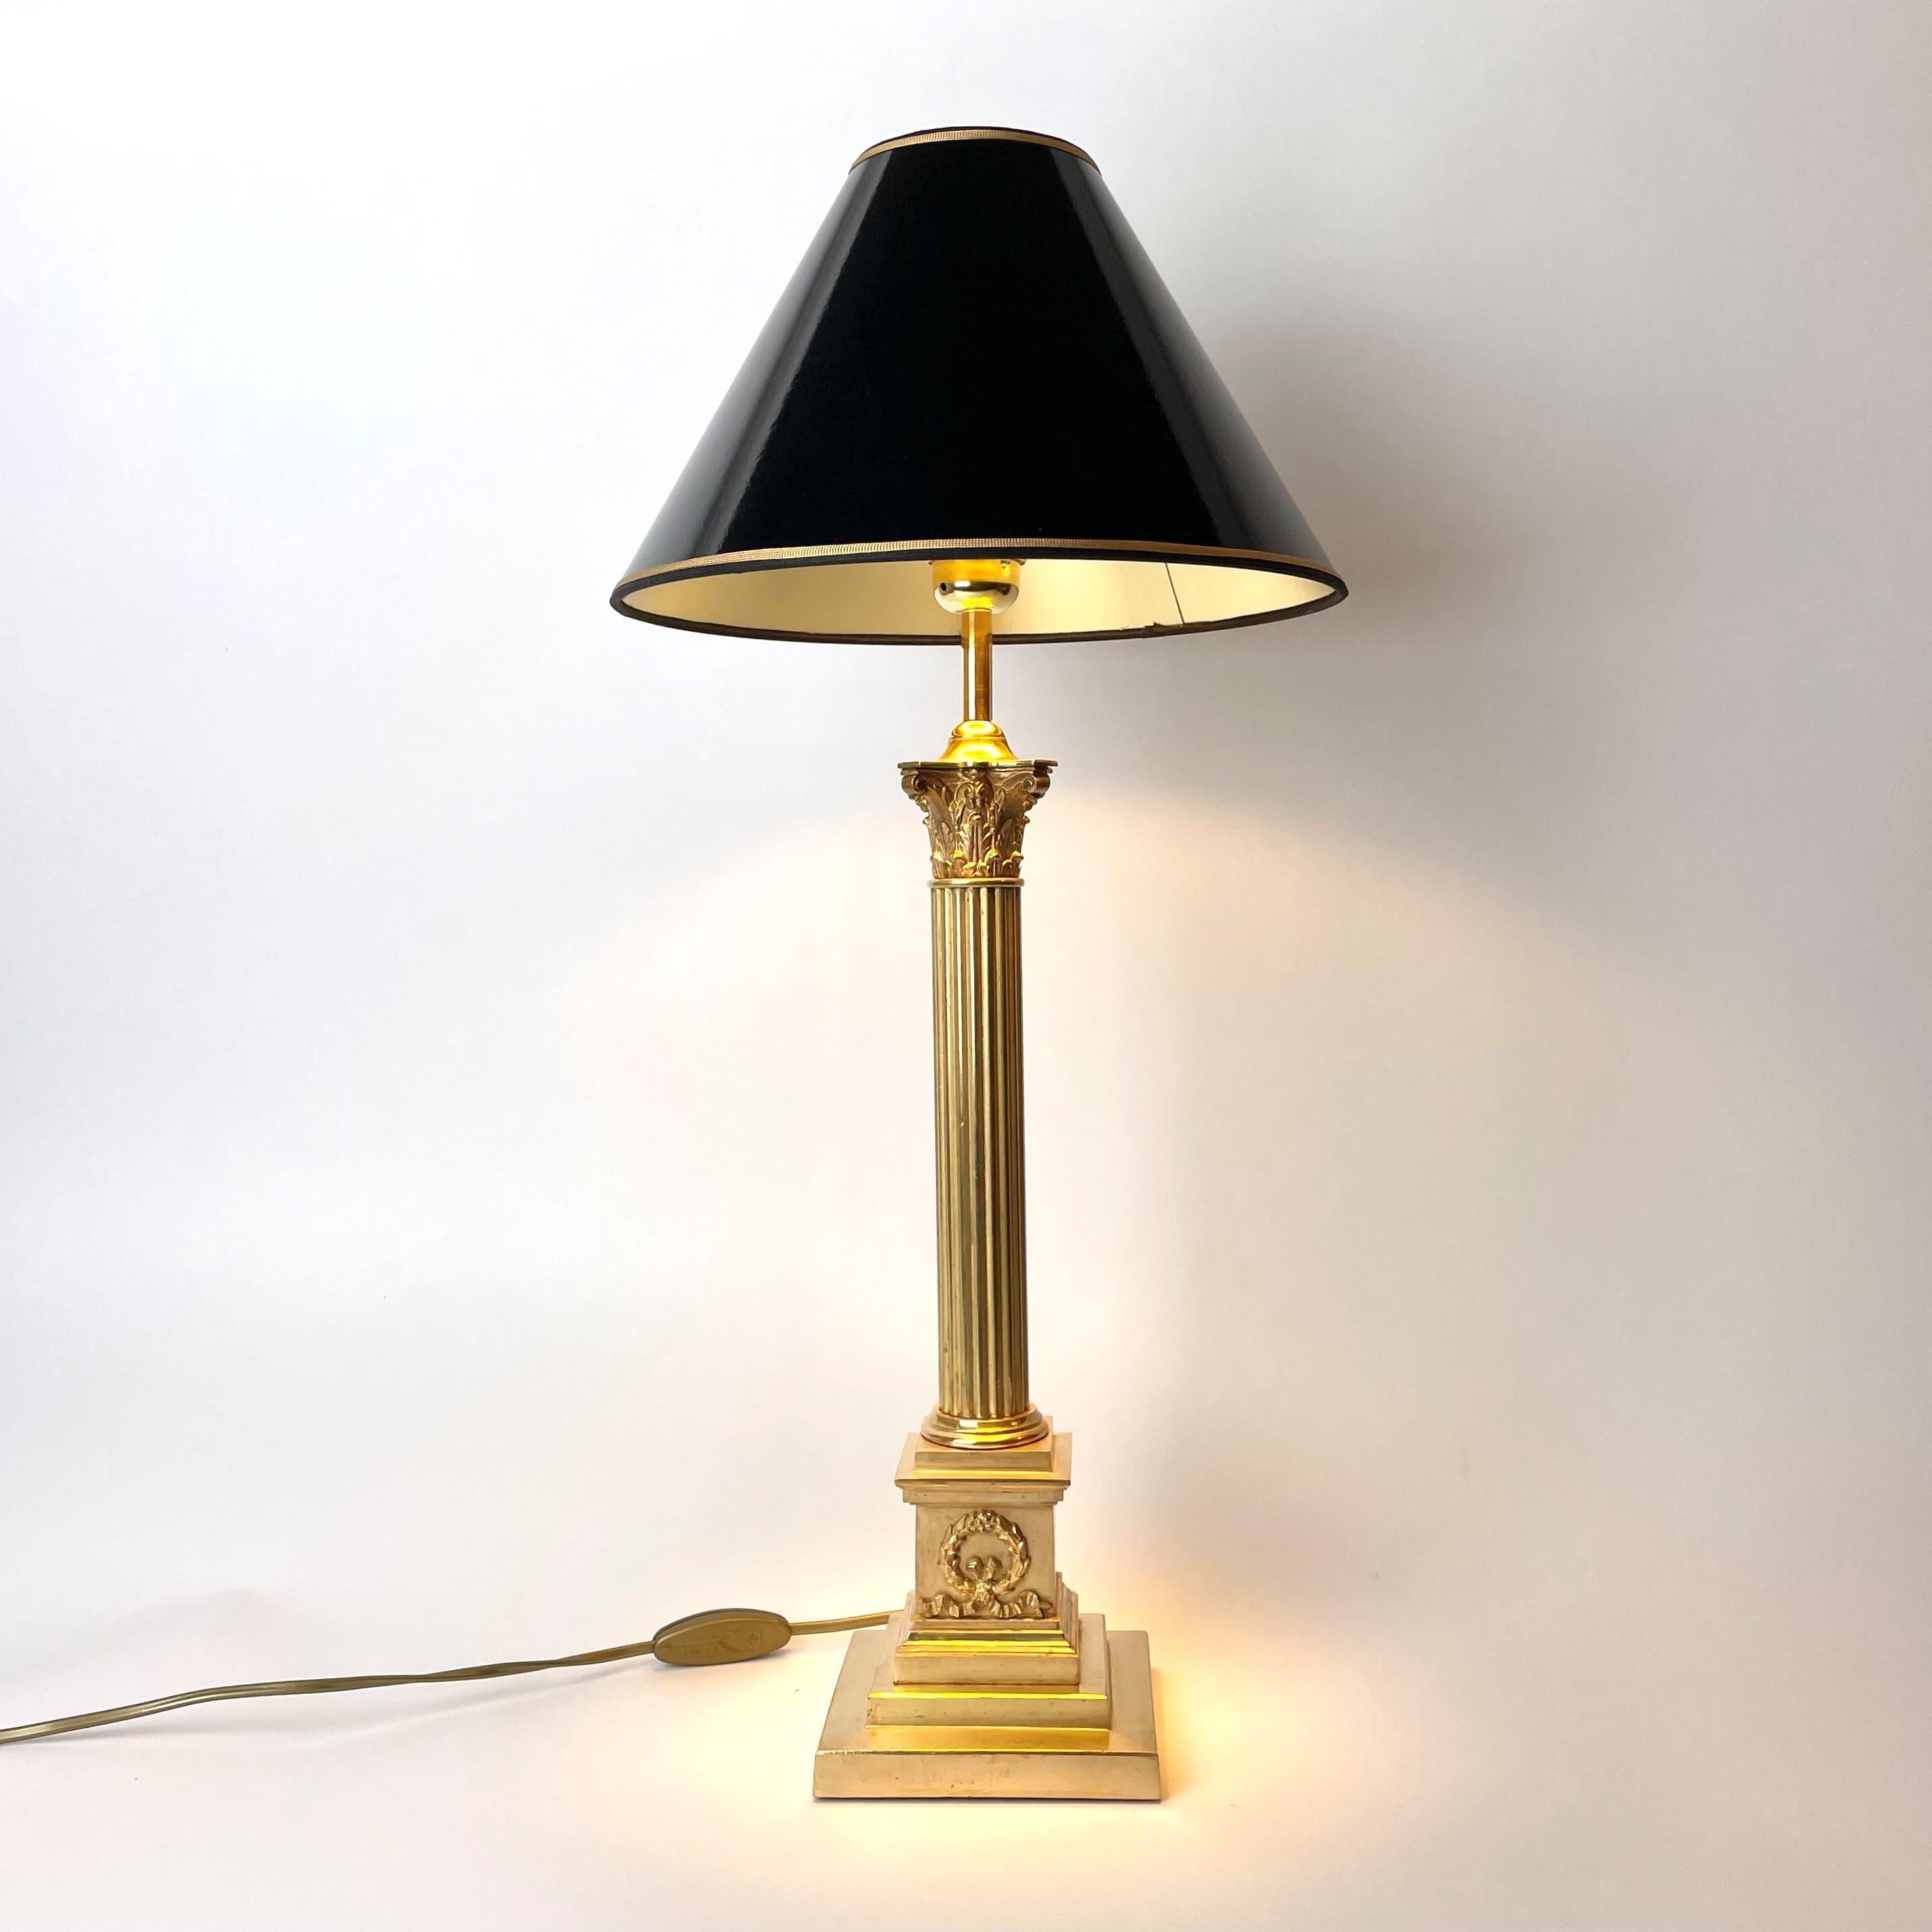 Beautiful classic table lamp in matte gold with polished edges in gold. Originally a kerosene lamp from the late 19th century that was converted into an electric table lamp in the 20th century.

Beautiful in its matte gold with the shiny edges,